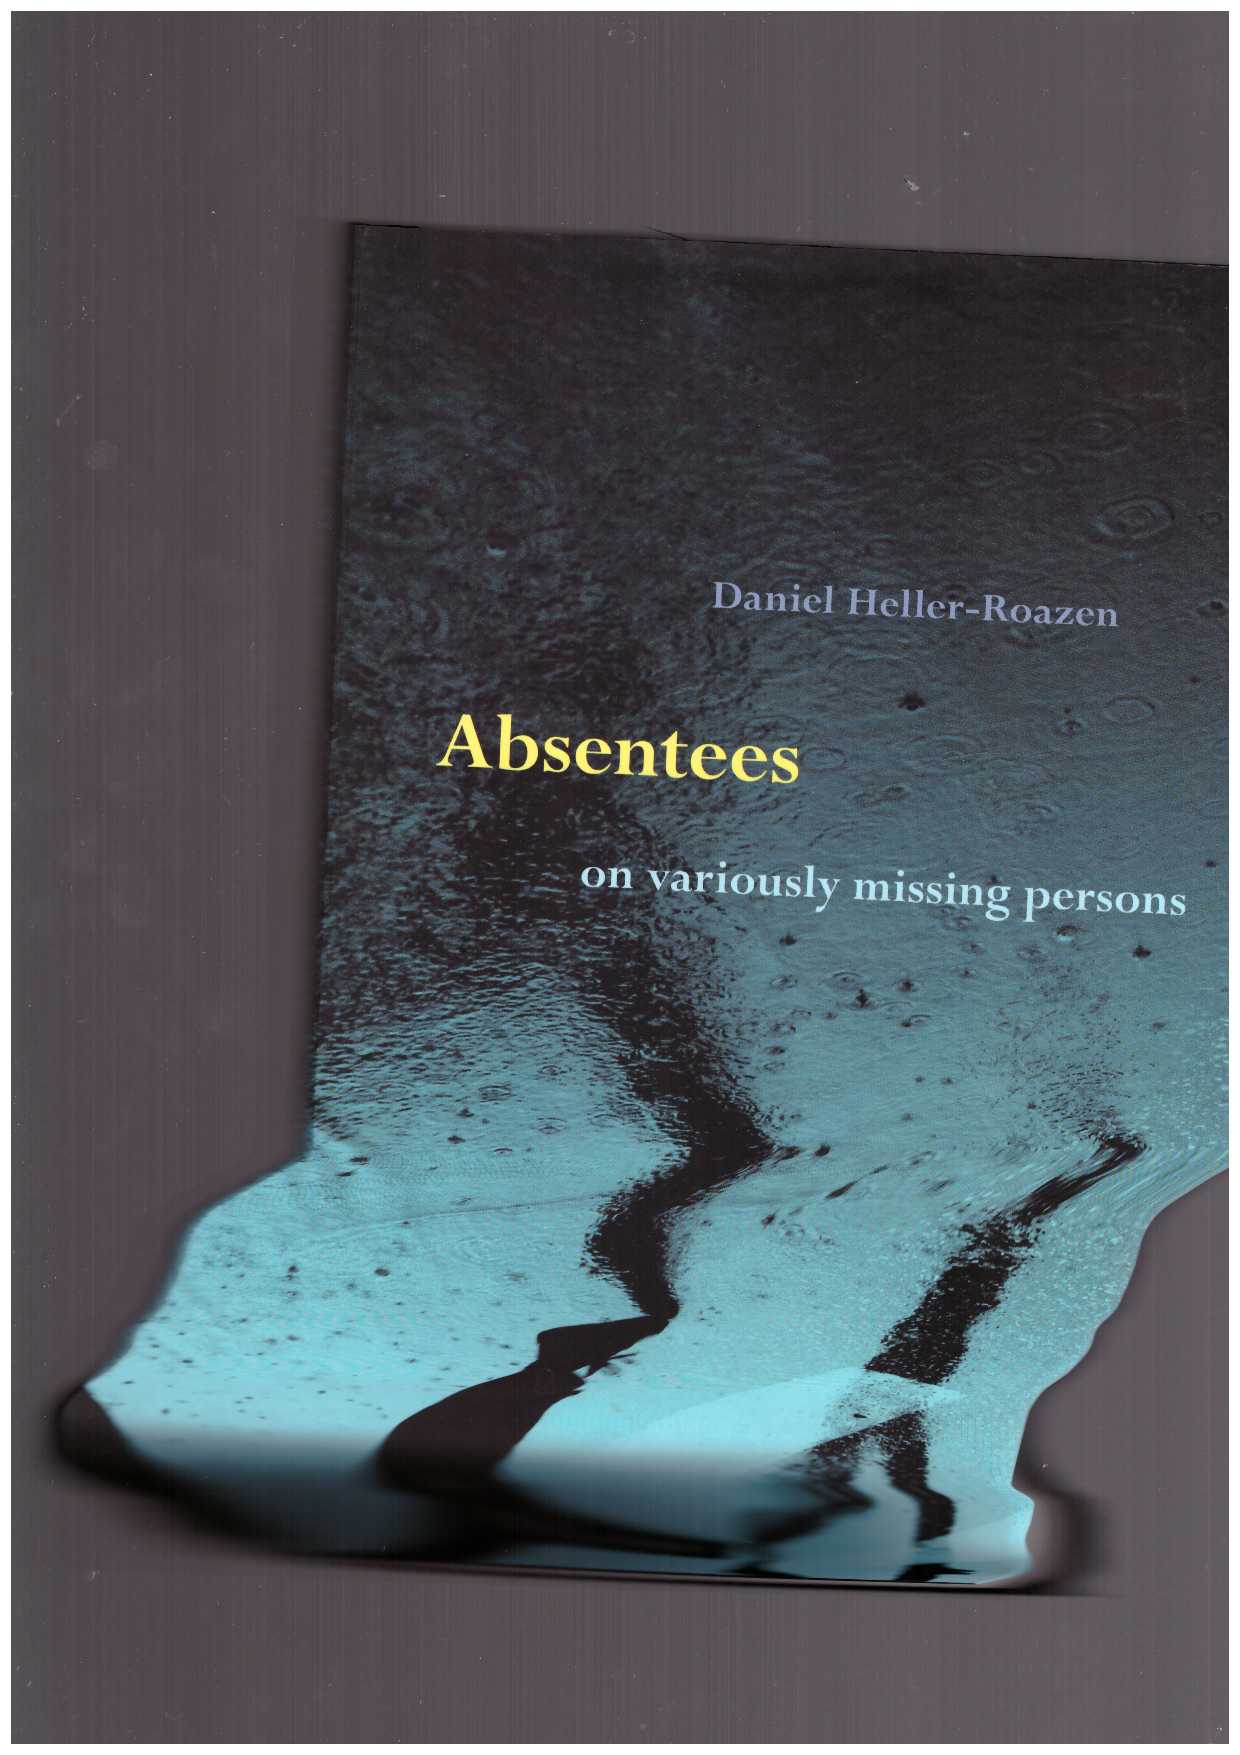 HELLER-ROAZEN, Daniel   - Absentees. On Variously Missing Persons